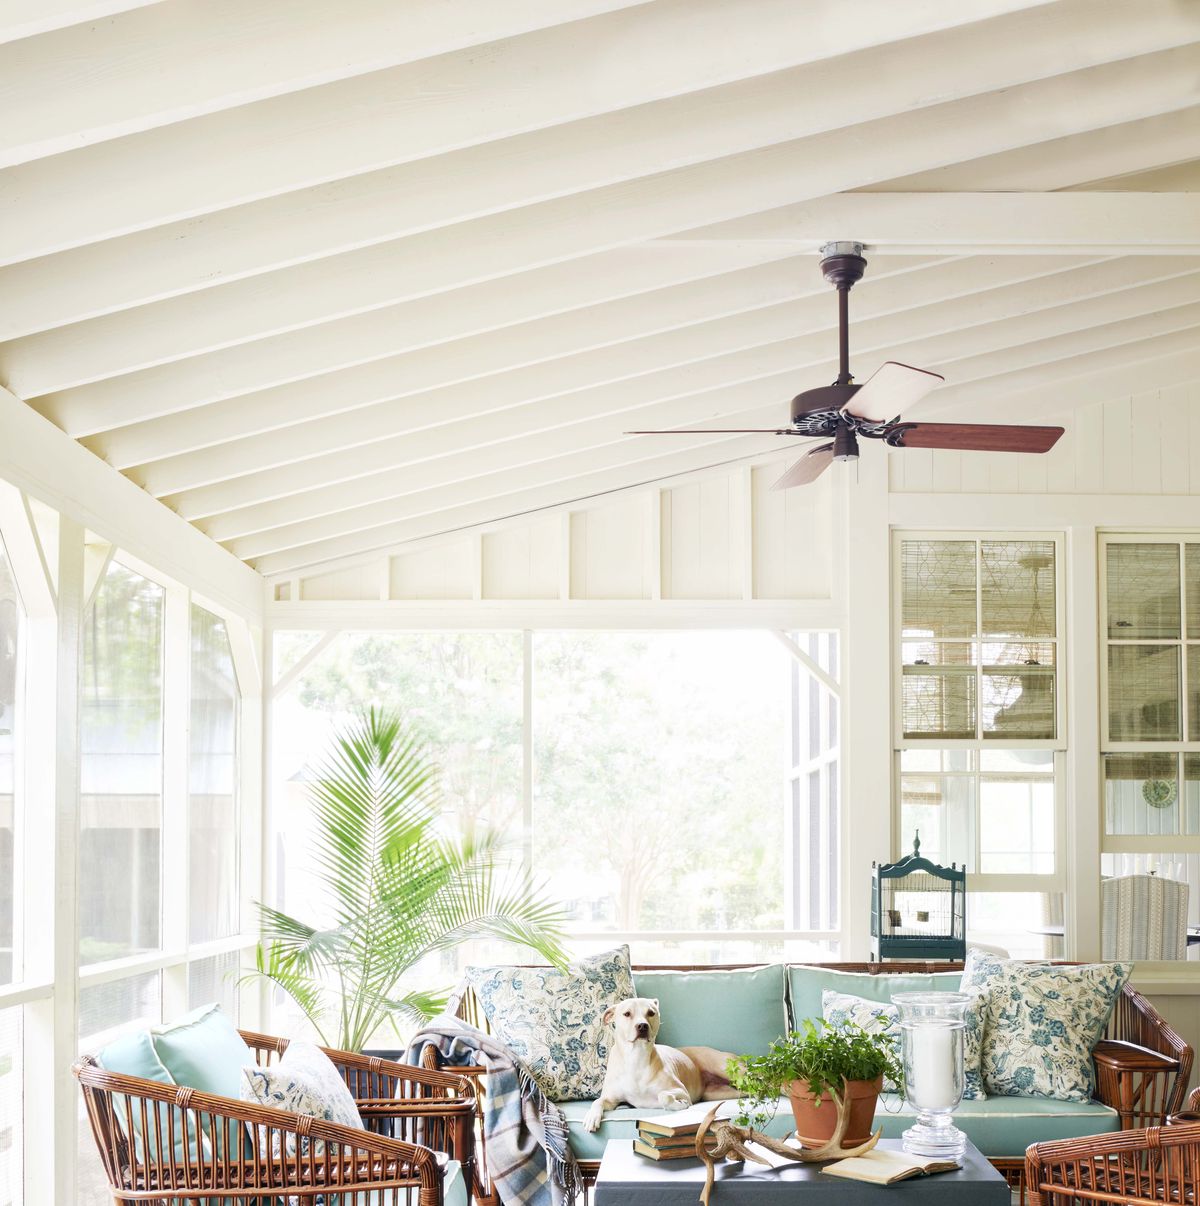 Charming Porch Wall Decor Ideas for Your Outdoor Space